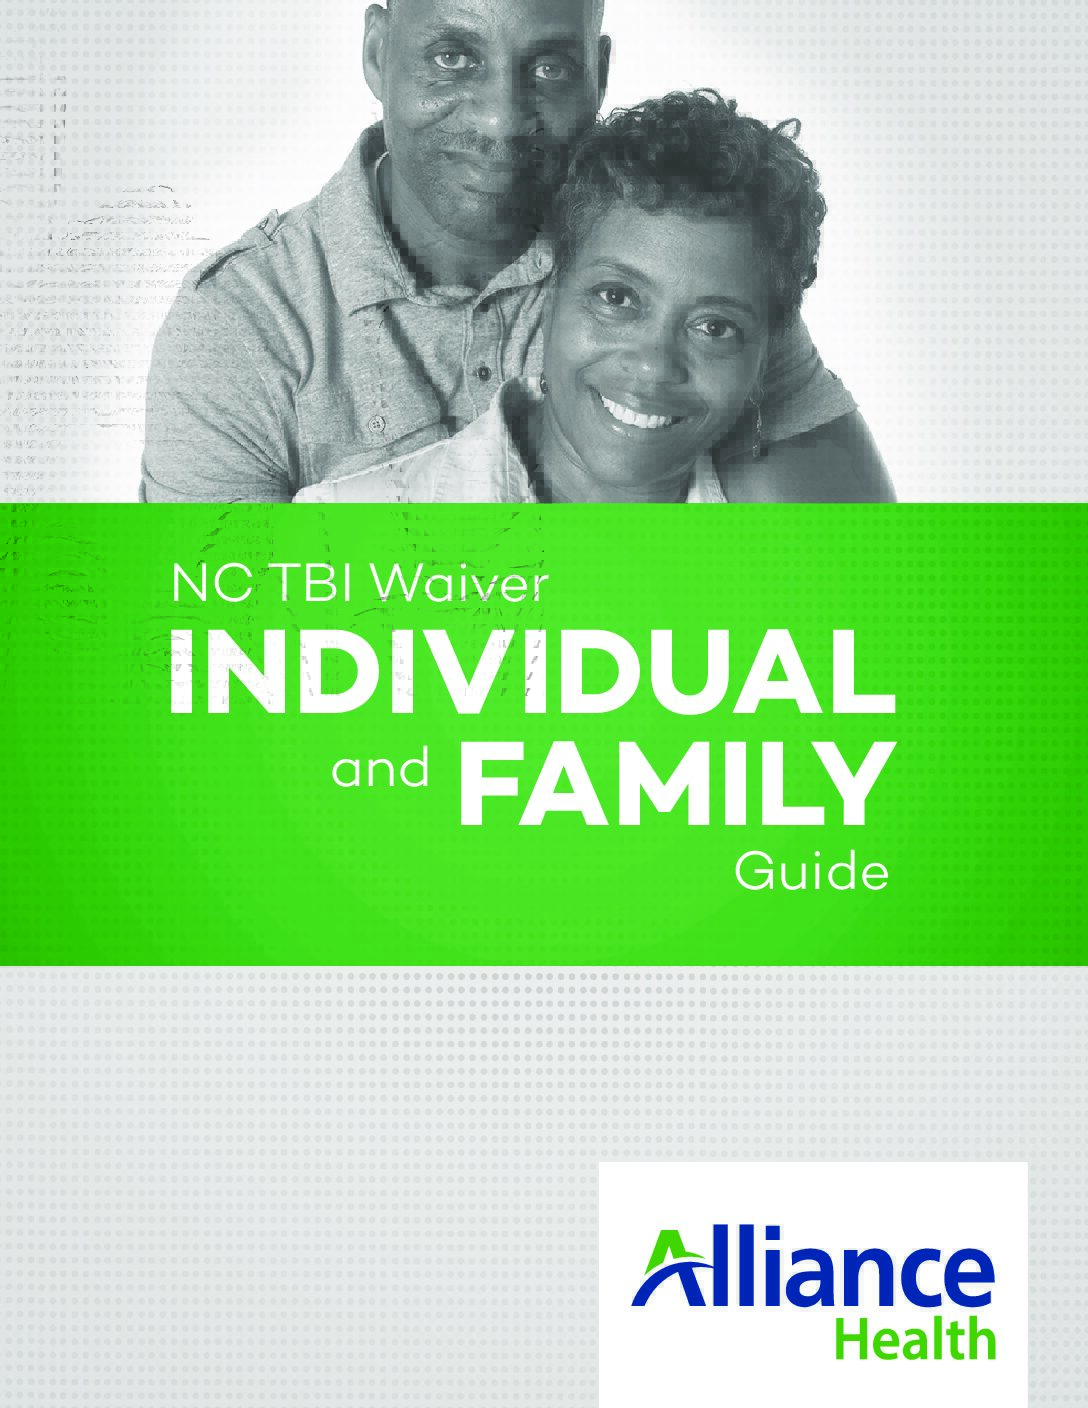 NC TBI Waiver Individual and Family Guide